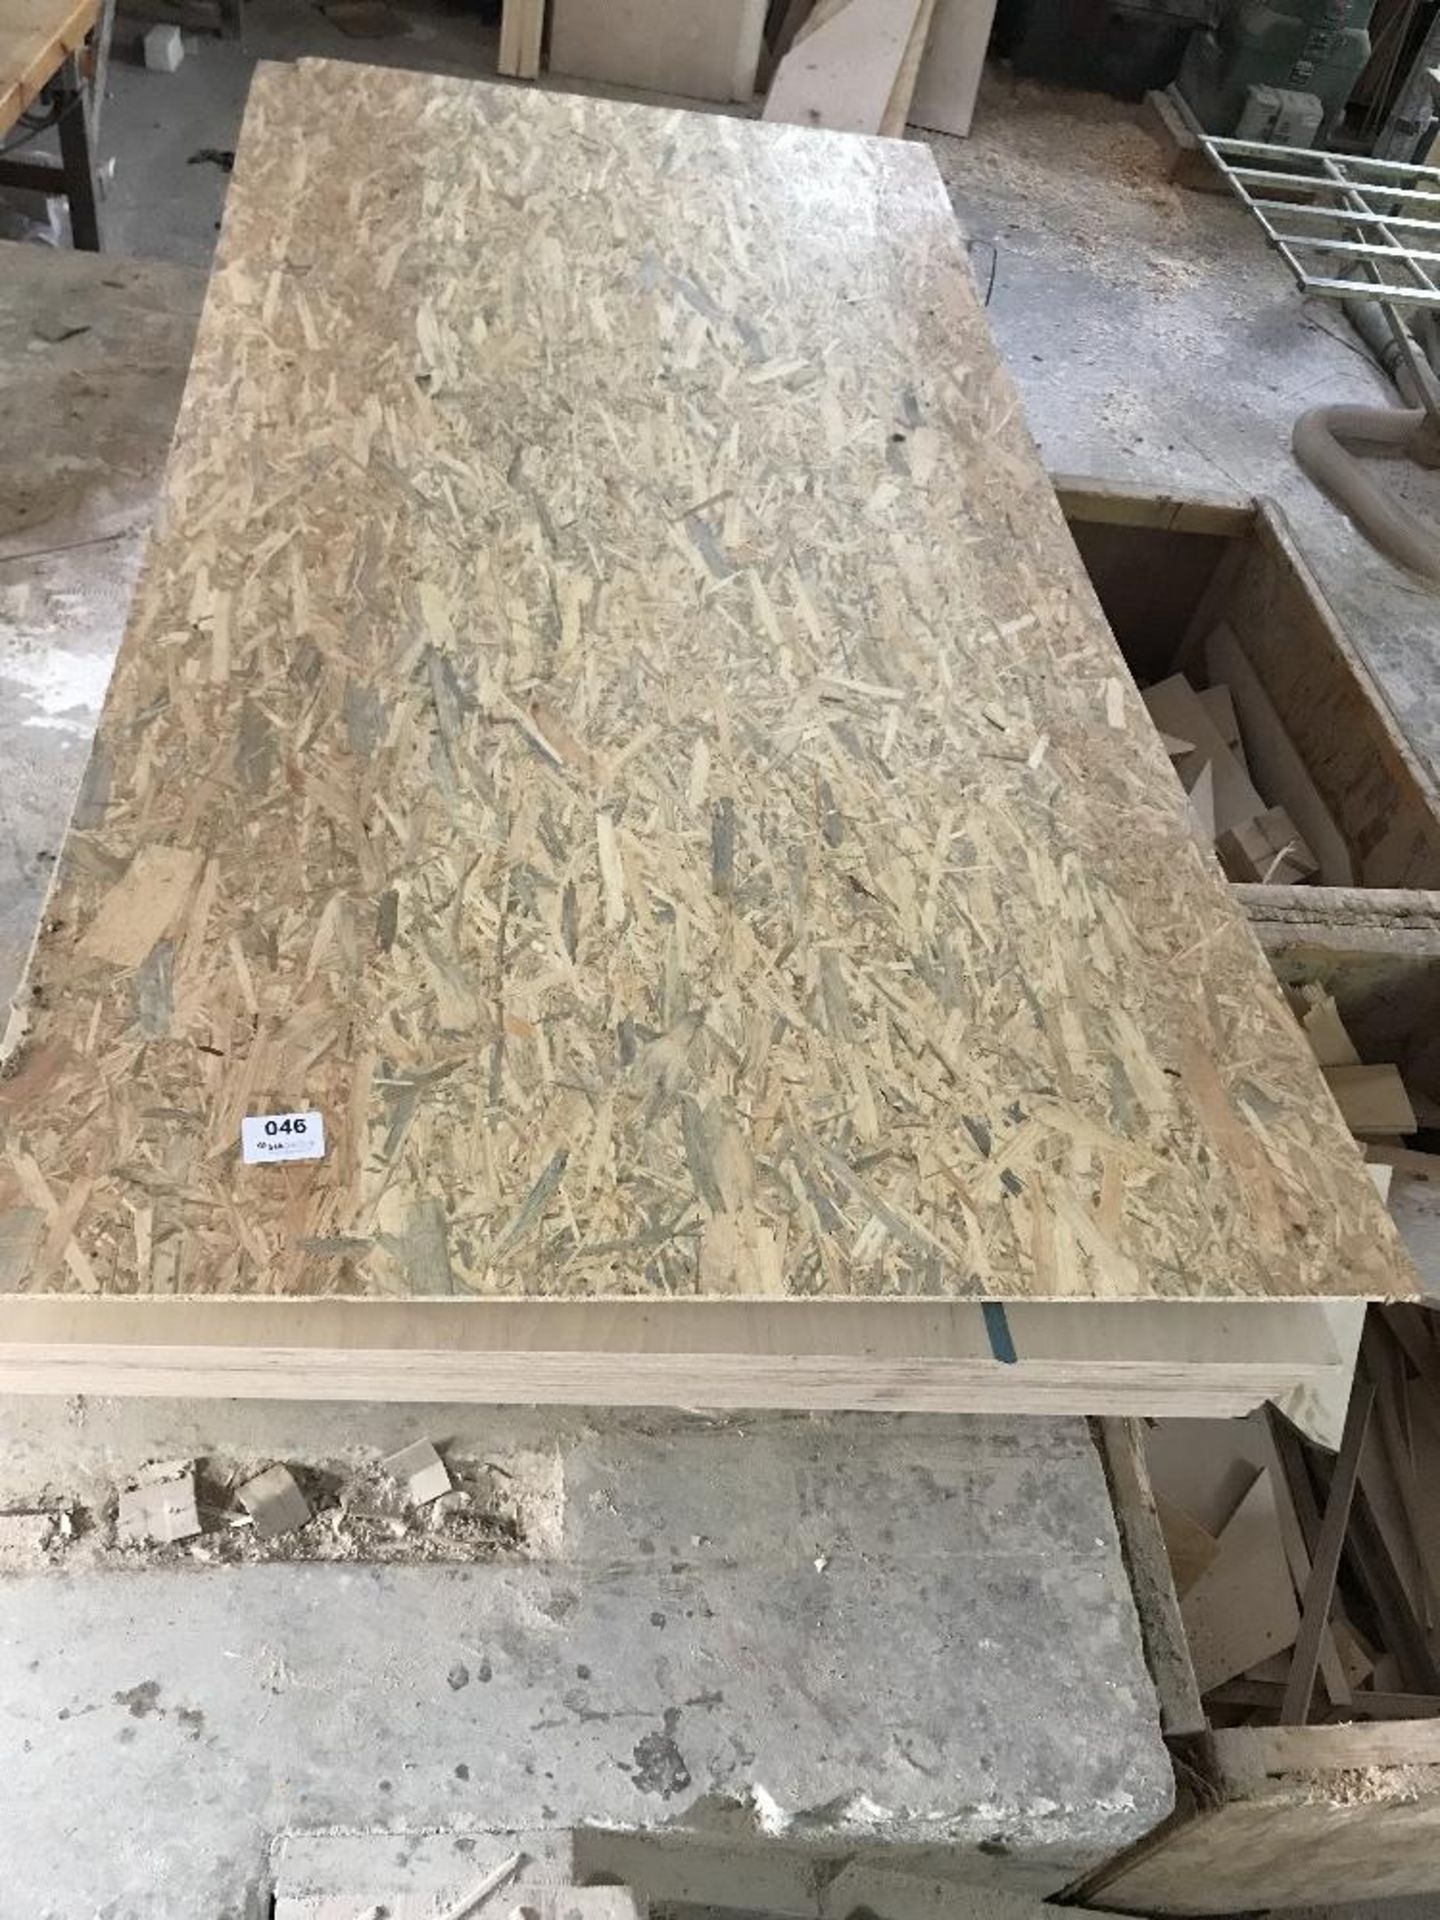 Quantity of 8x4 plywood sheets